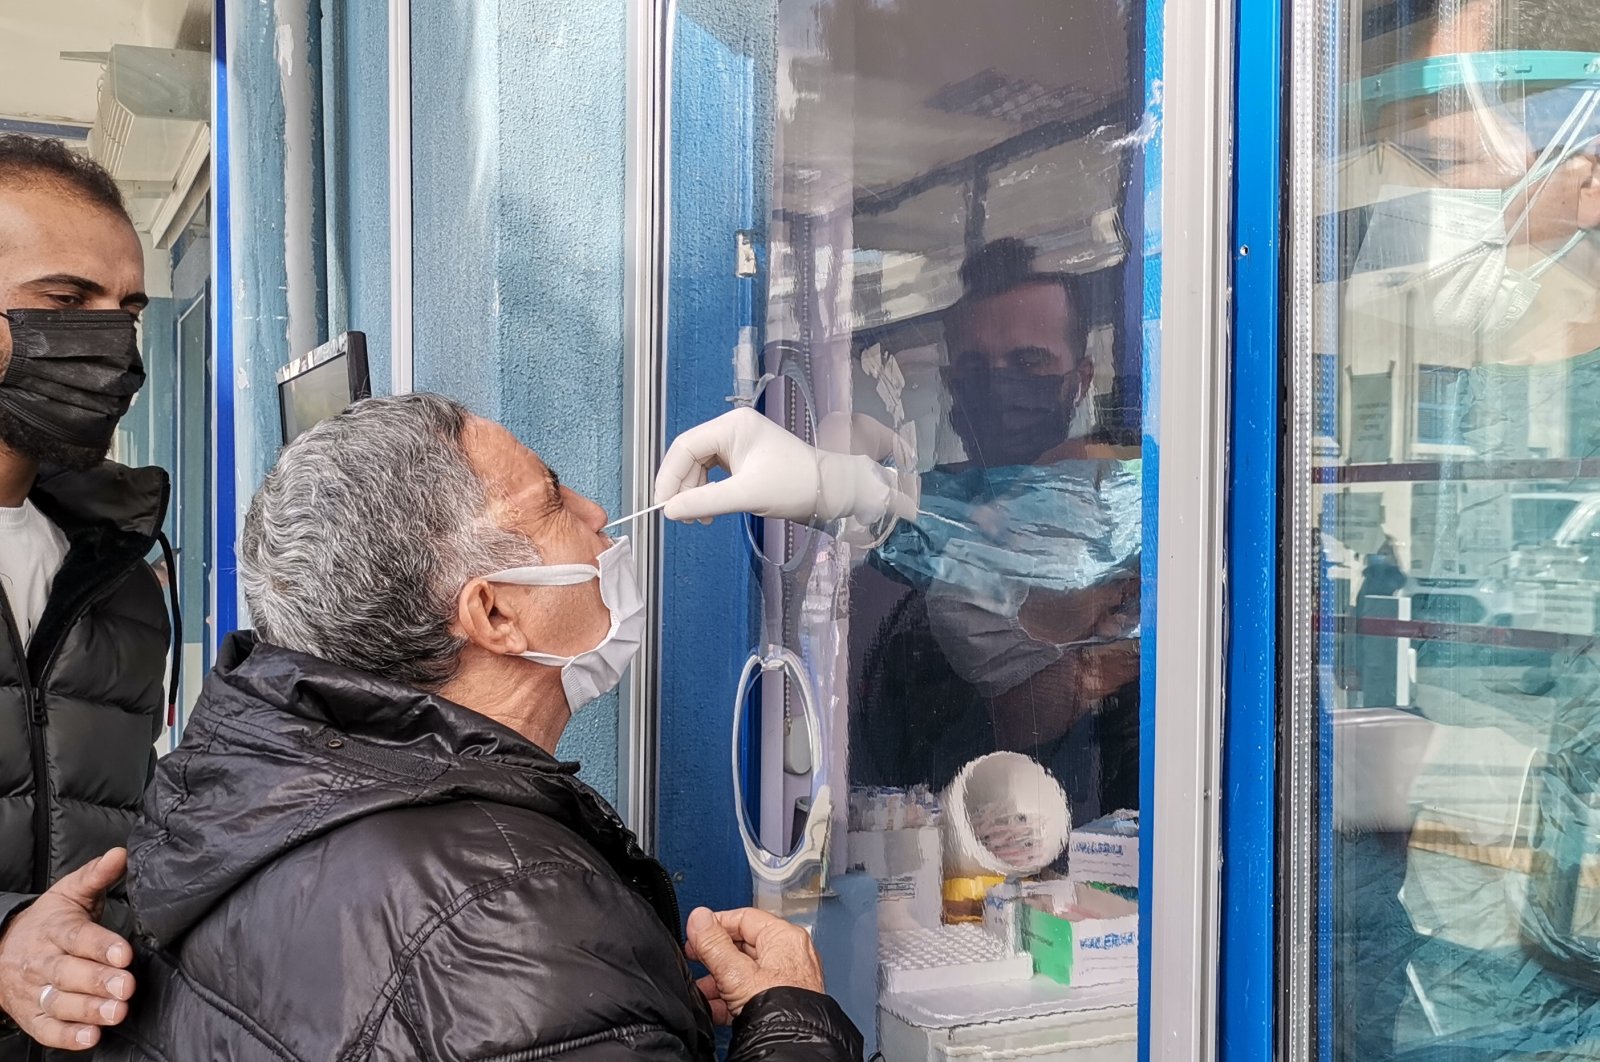 A man is tested for COVID-19 at a hospital in Ordu, northern Turkey, March 17, 2022. (DHA Photo)